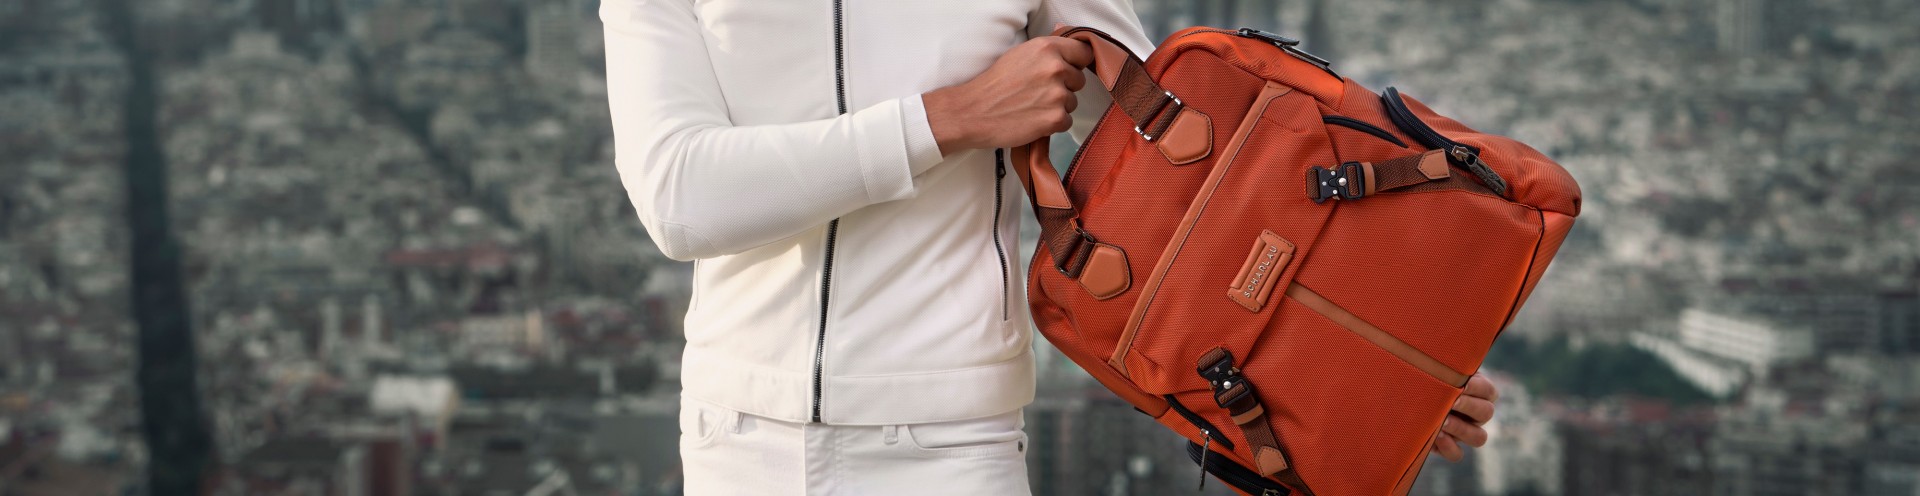 High Quality Functional Backpacks and Travel Bags First Class Collection